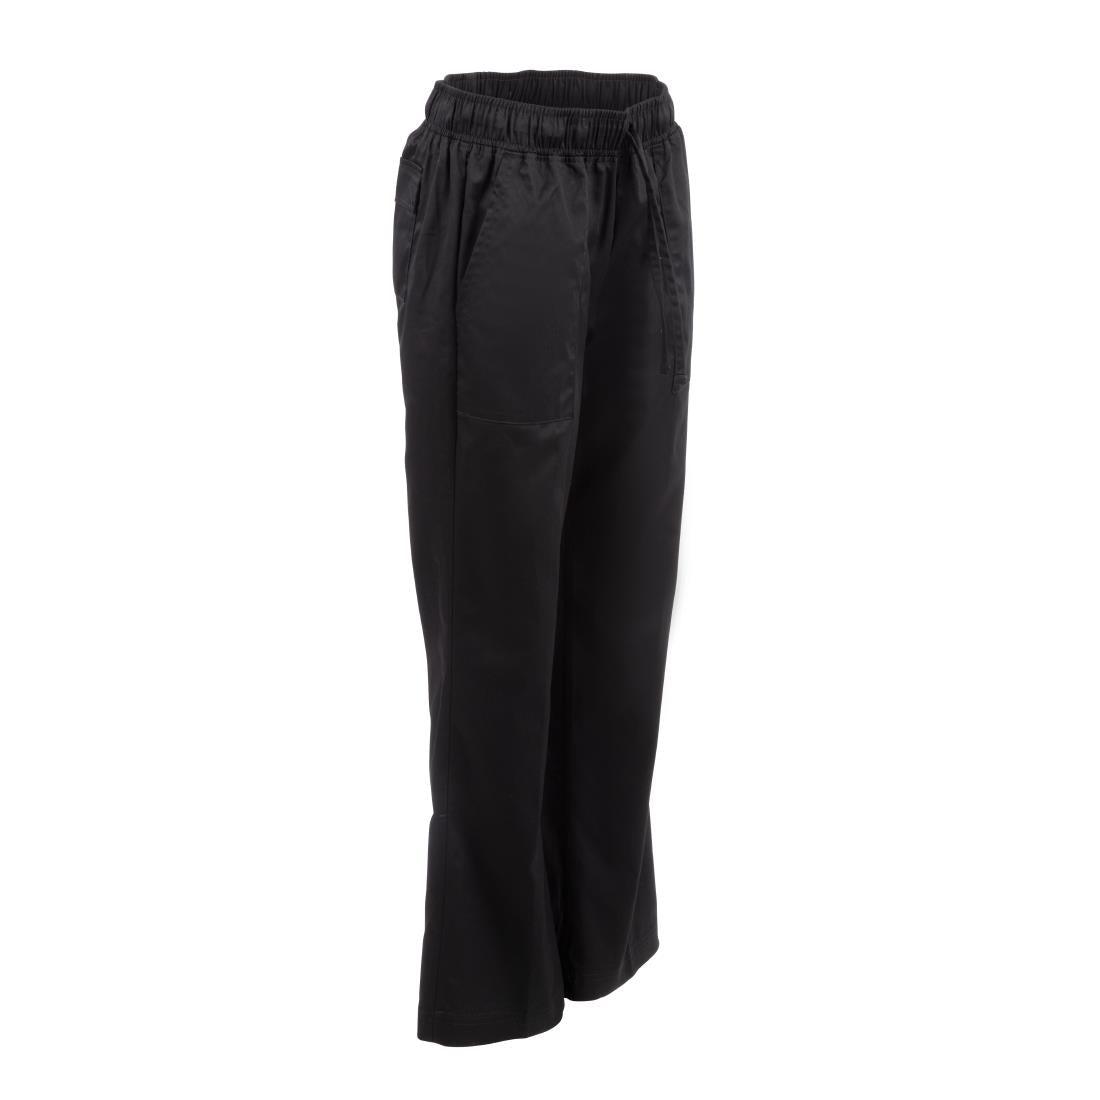 A431-XS Chef Works Womens Executive Chef Trousers Black XS